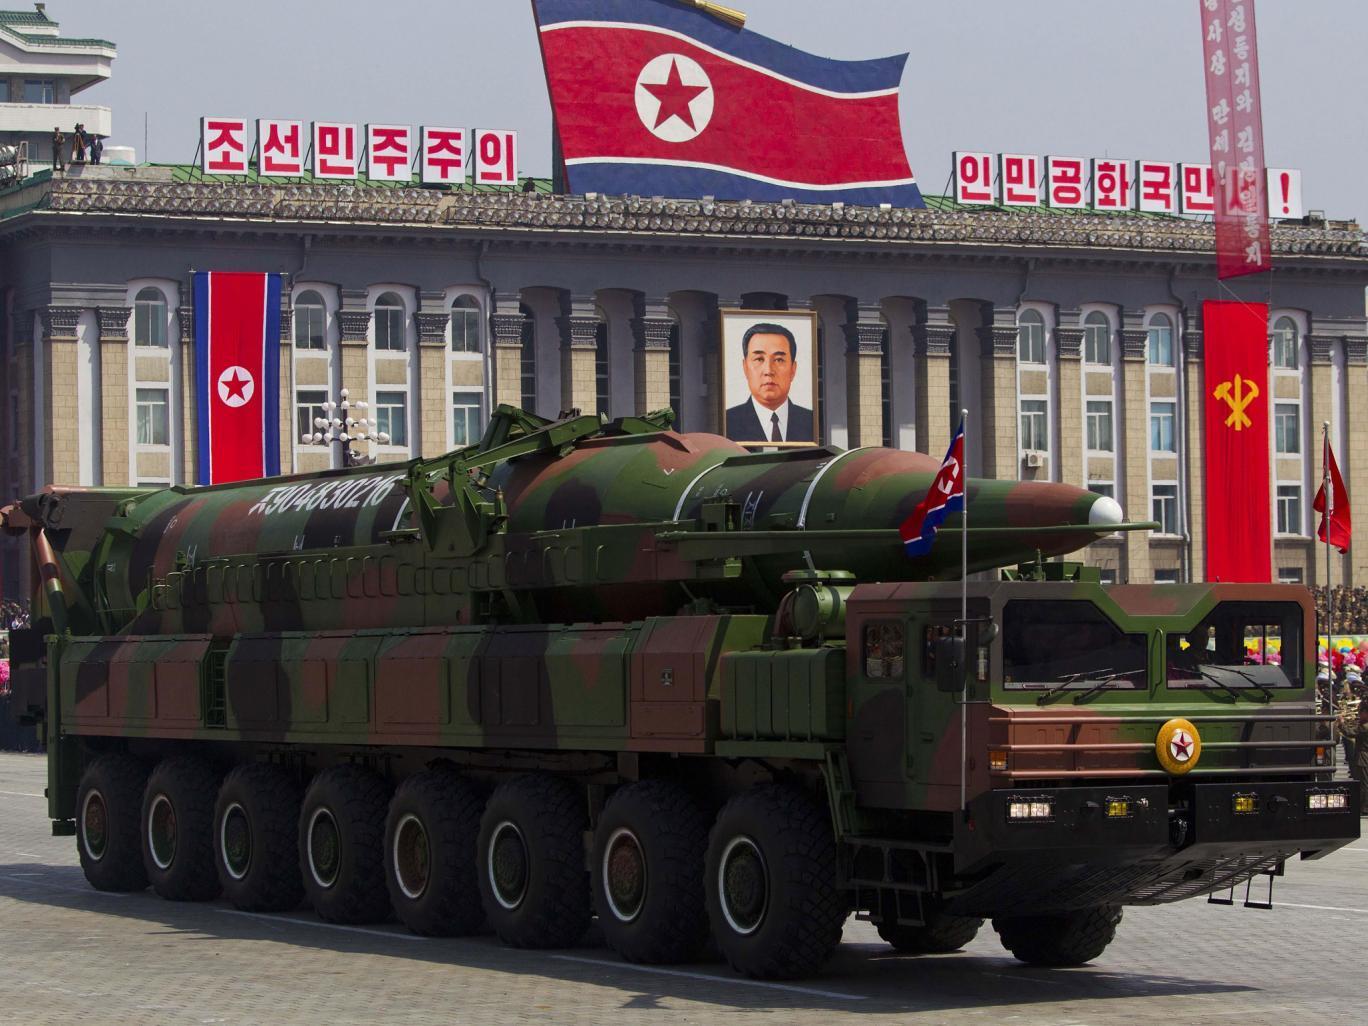 A North Korean vehicle carrying a missile passes by during a mass military parade in Pyongyang's Kim Il Sung Square to celebrate the centenary of the birth of the late North Korean founder Kim Il Sung